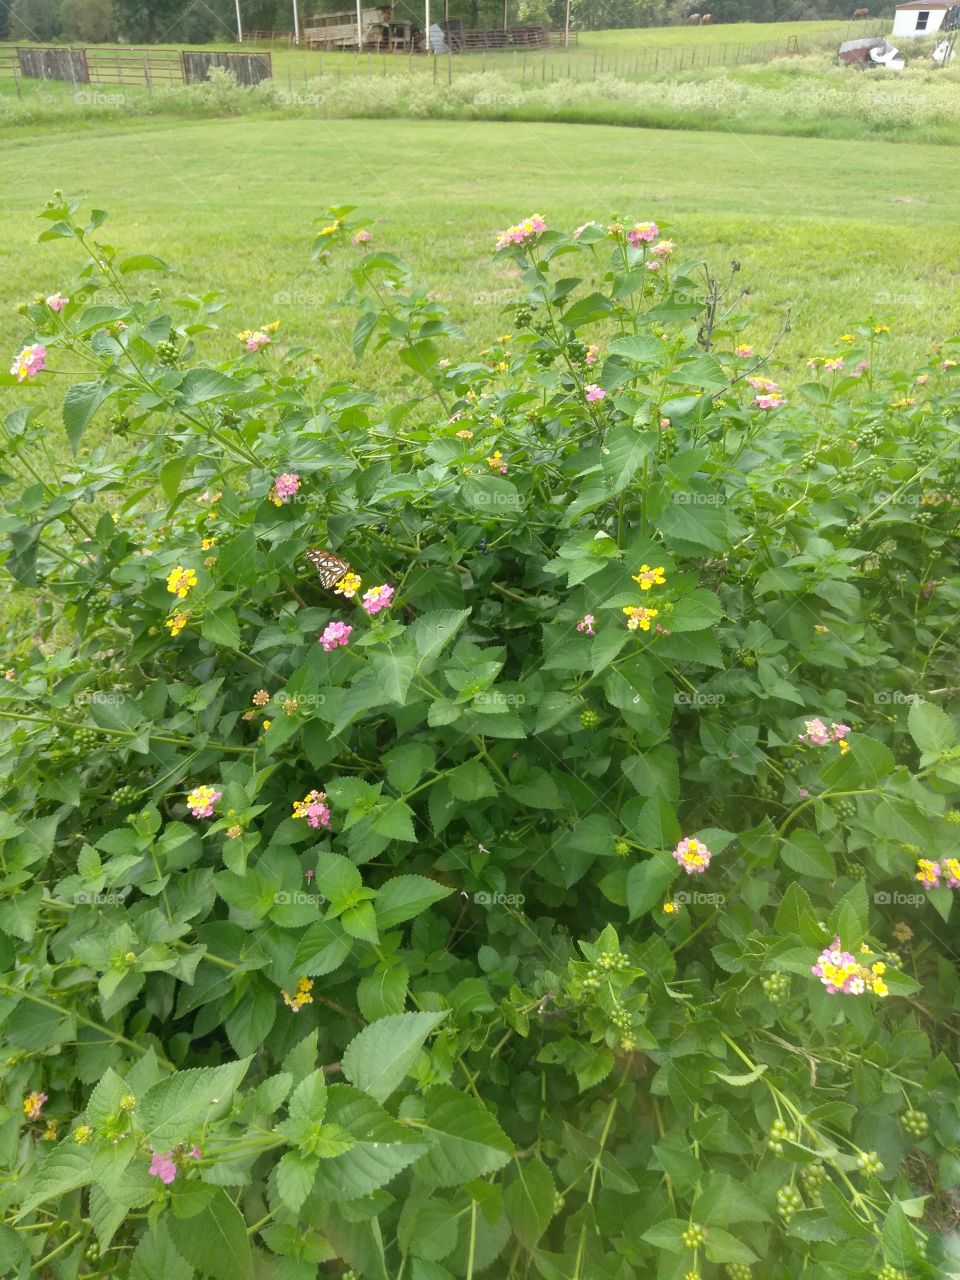 beautiful lantana's that butterflies are very attracted to